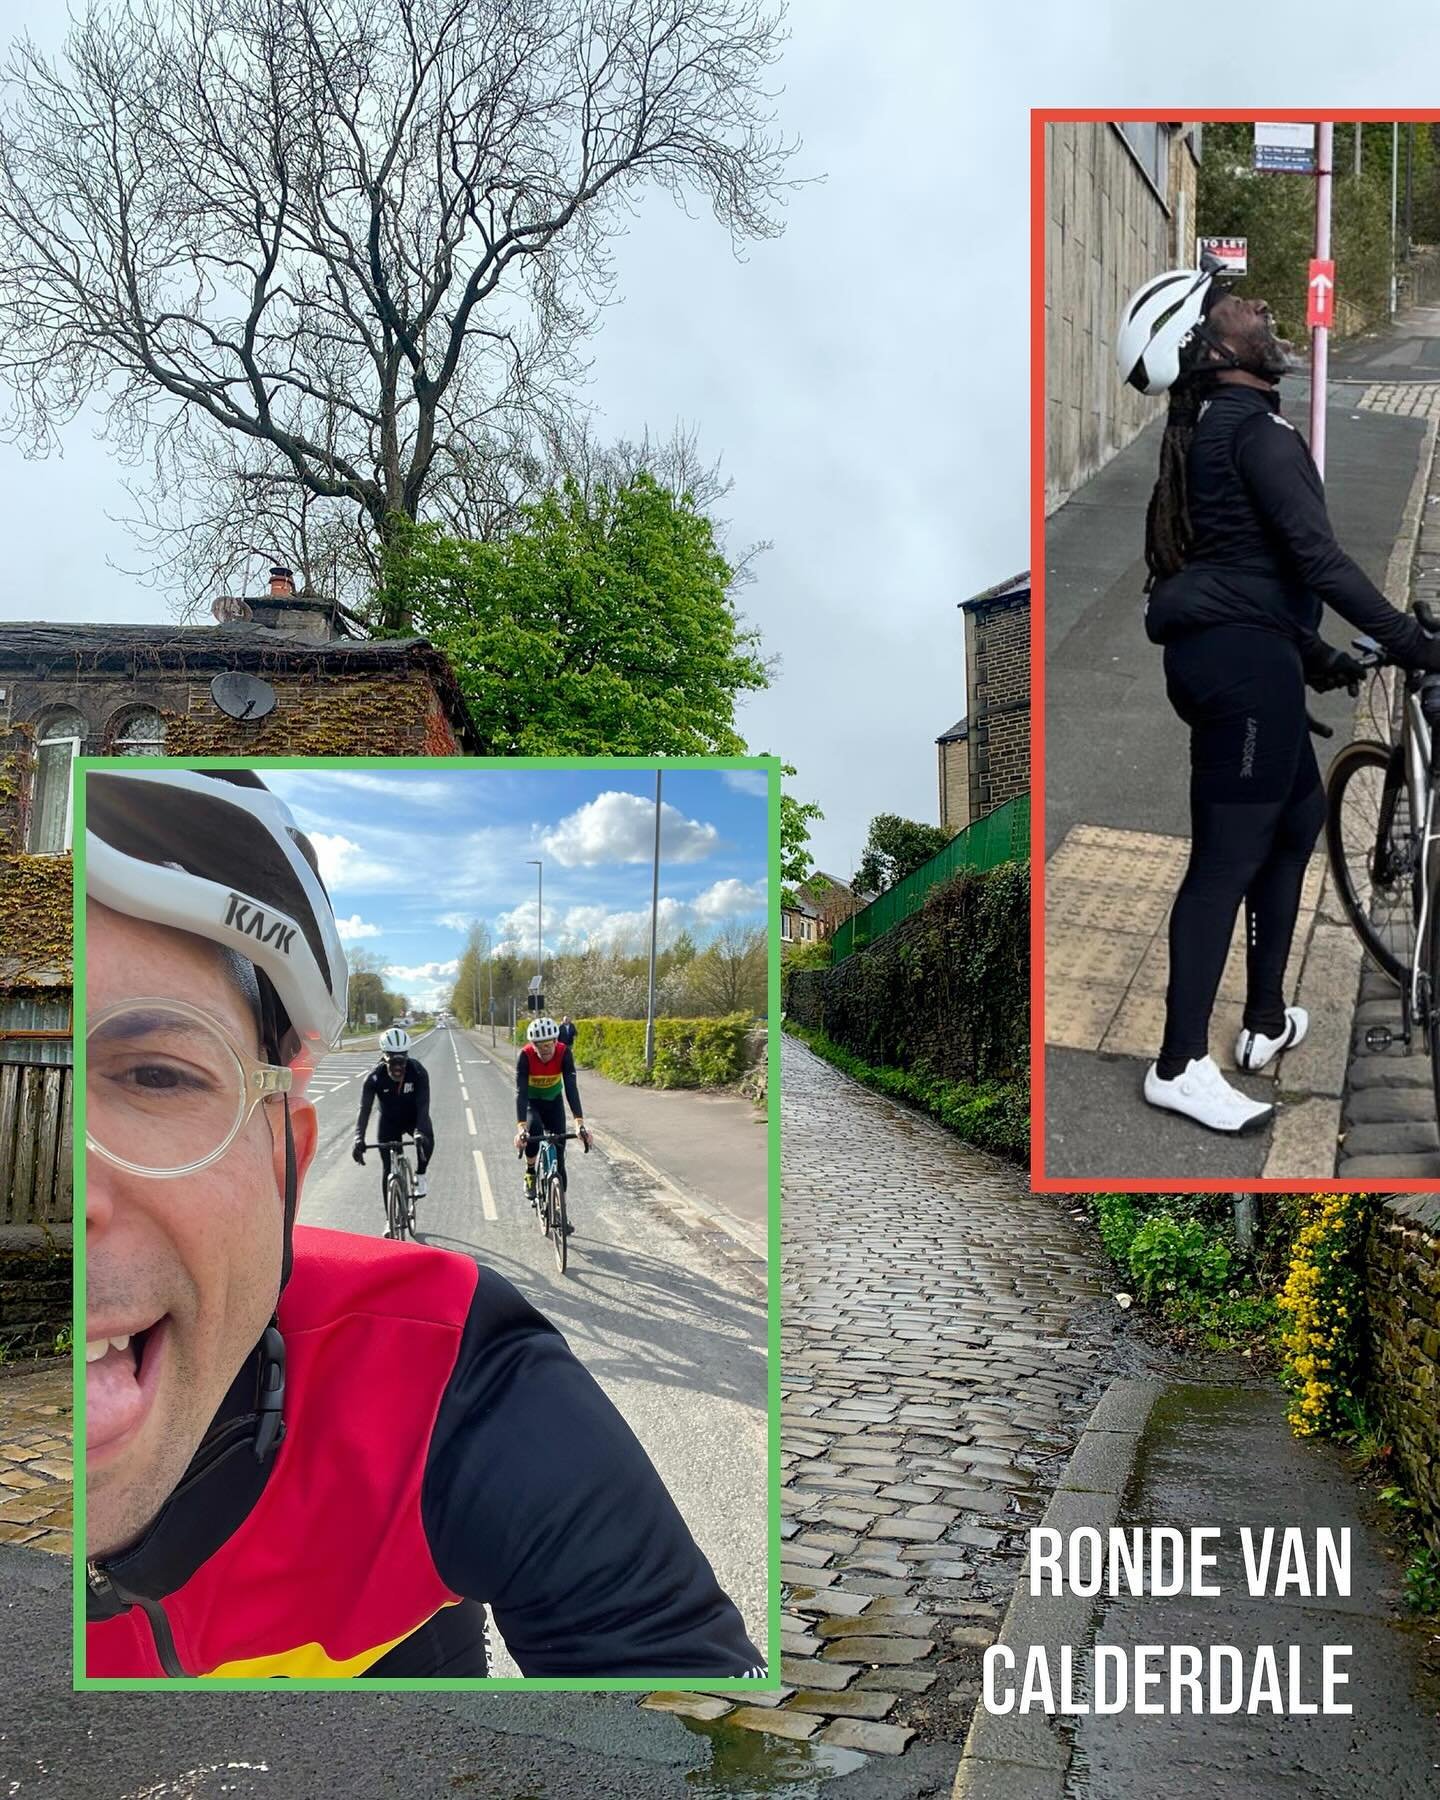 It&rsquo;s been a busy month at Brixton Cycles Club with members taking part in multiple events. Here&rsquo;s some highlights!

1. Wayne and co. tackled the gruelling Ronde Van Calderdale a cobbled climbing sportive not for the faint of heart. He eve